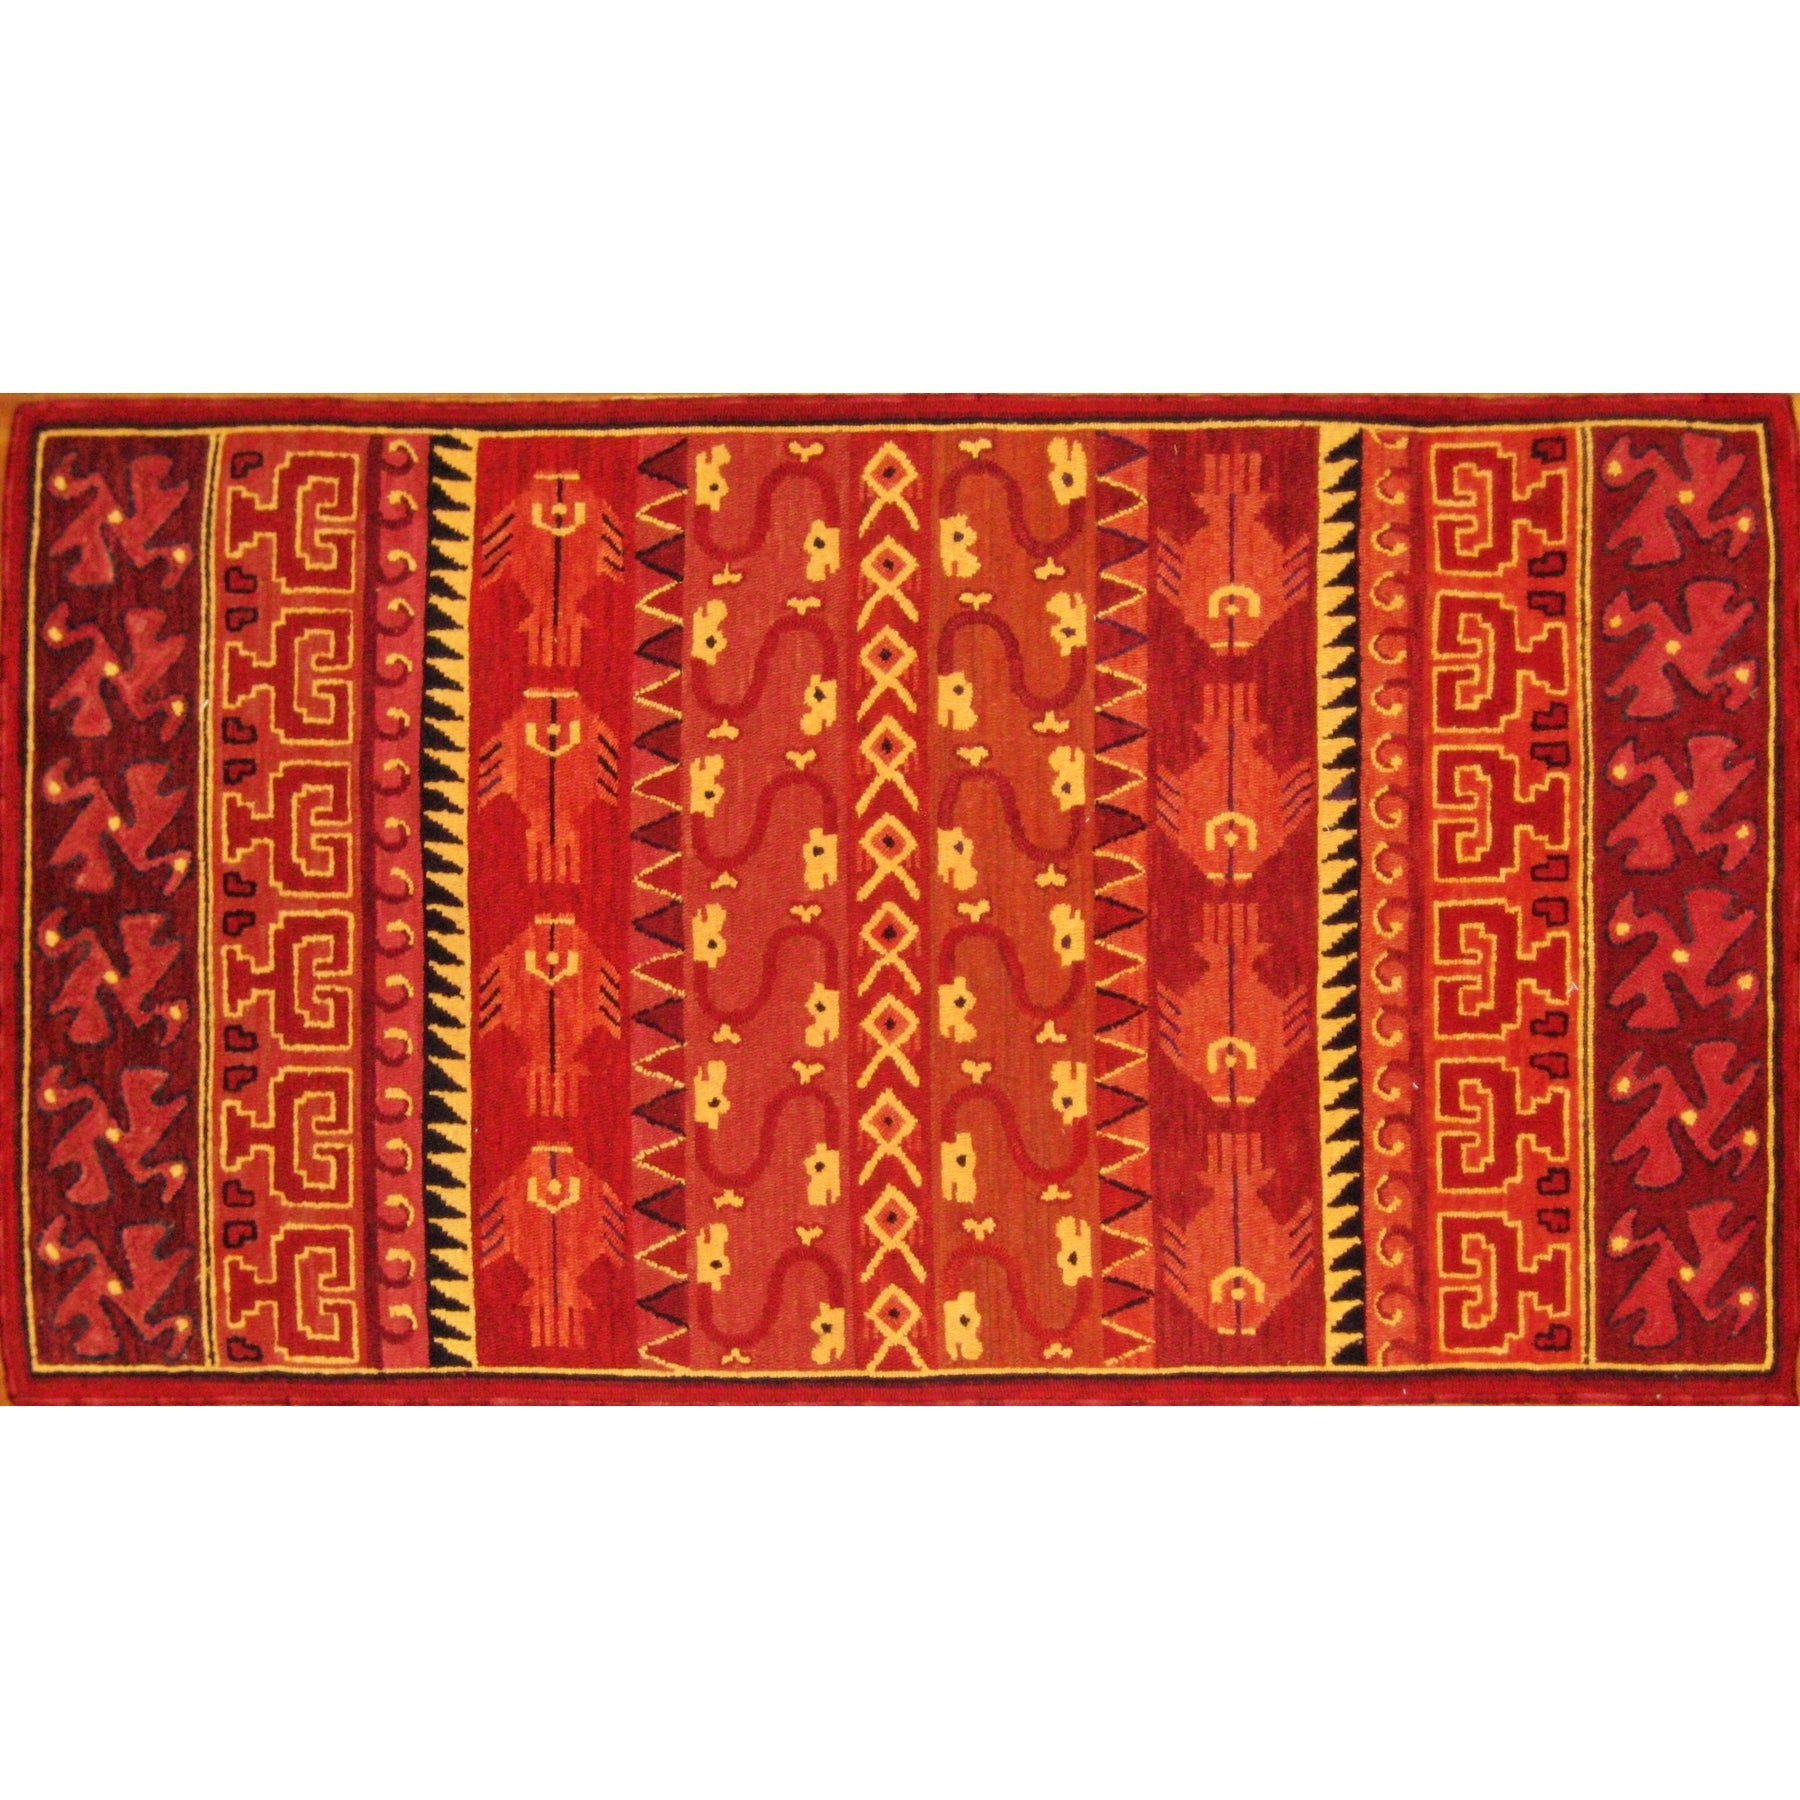 Peruvian Images, rug hooked by Martha Beals